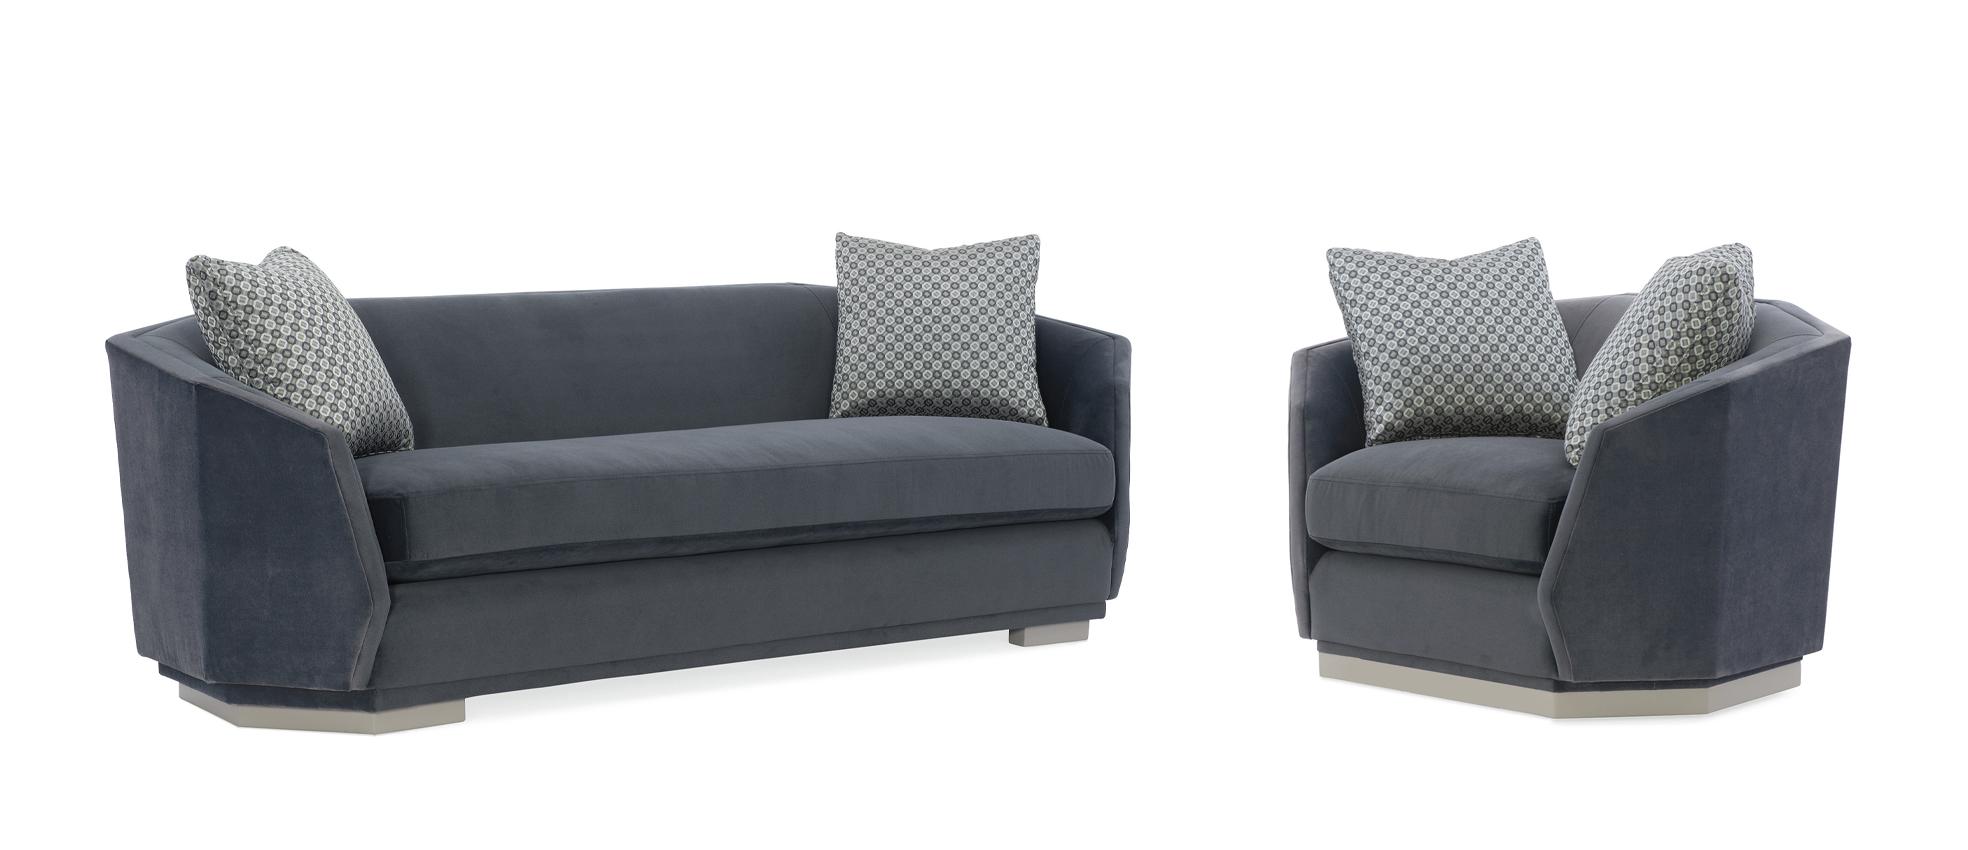 Contemporary Sofa and Chair Expressions Sofa M120-420-011-A-Set-2 in Fog Velvet